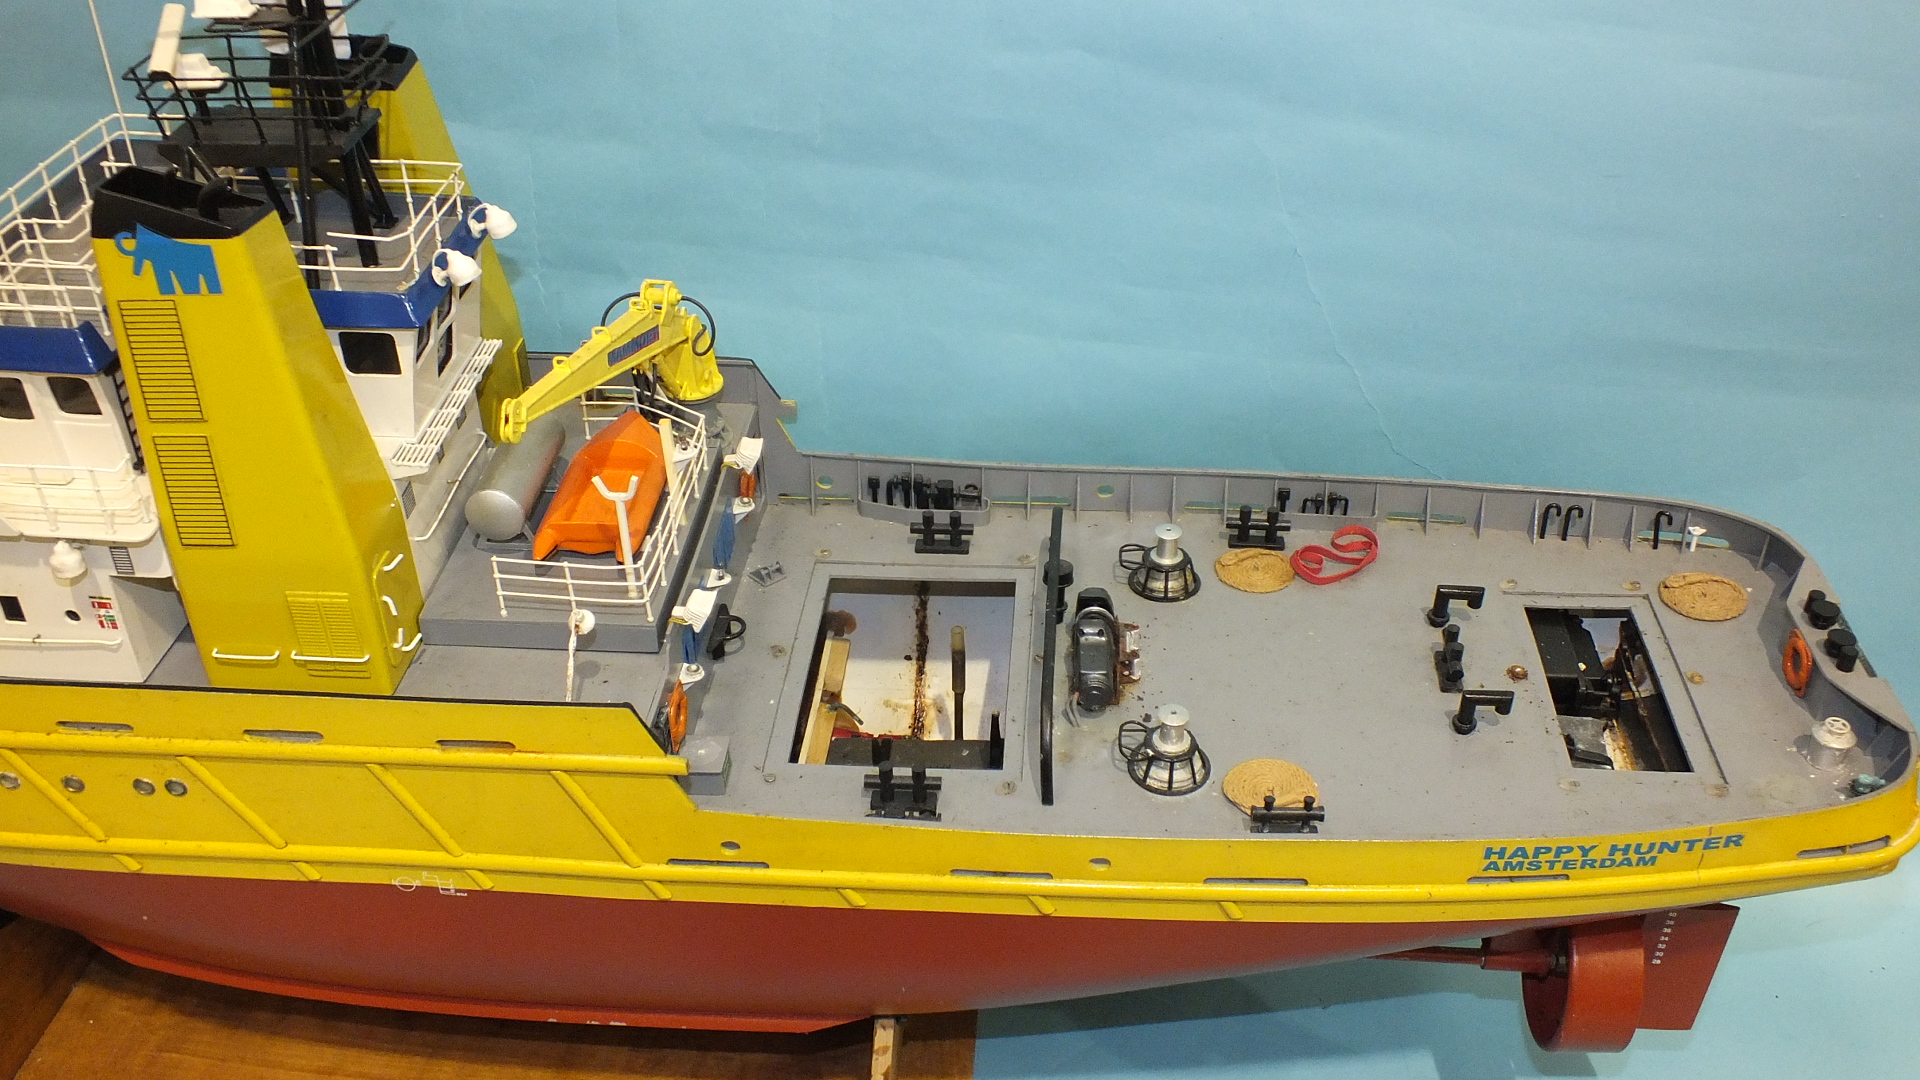 A plastic radio-controlled model of "The Happy Hunter", Mammoet, Amsterdam, salvage tug boat, - Image 2 of 3